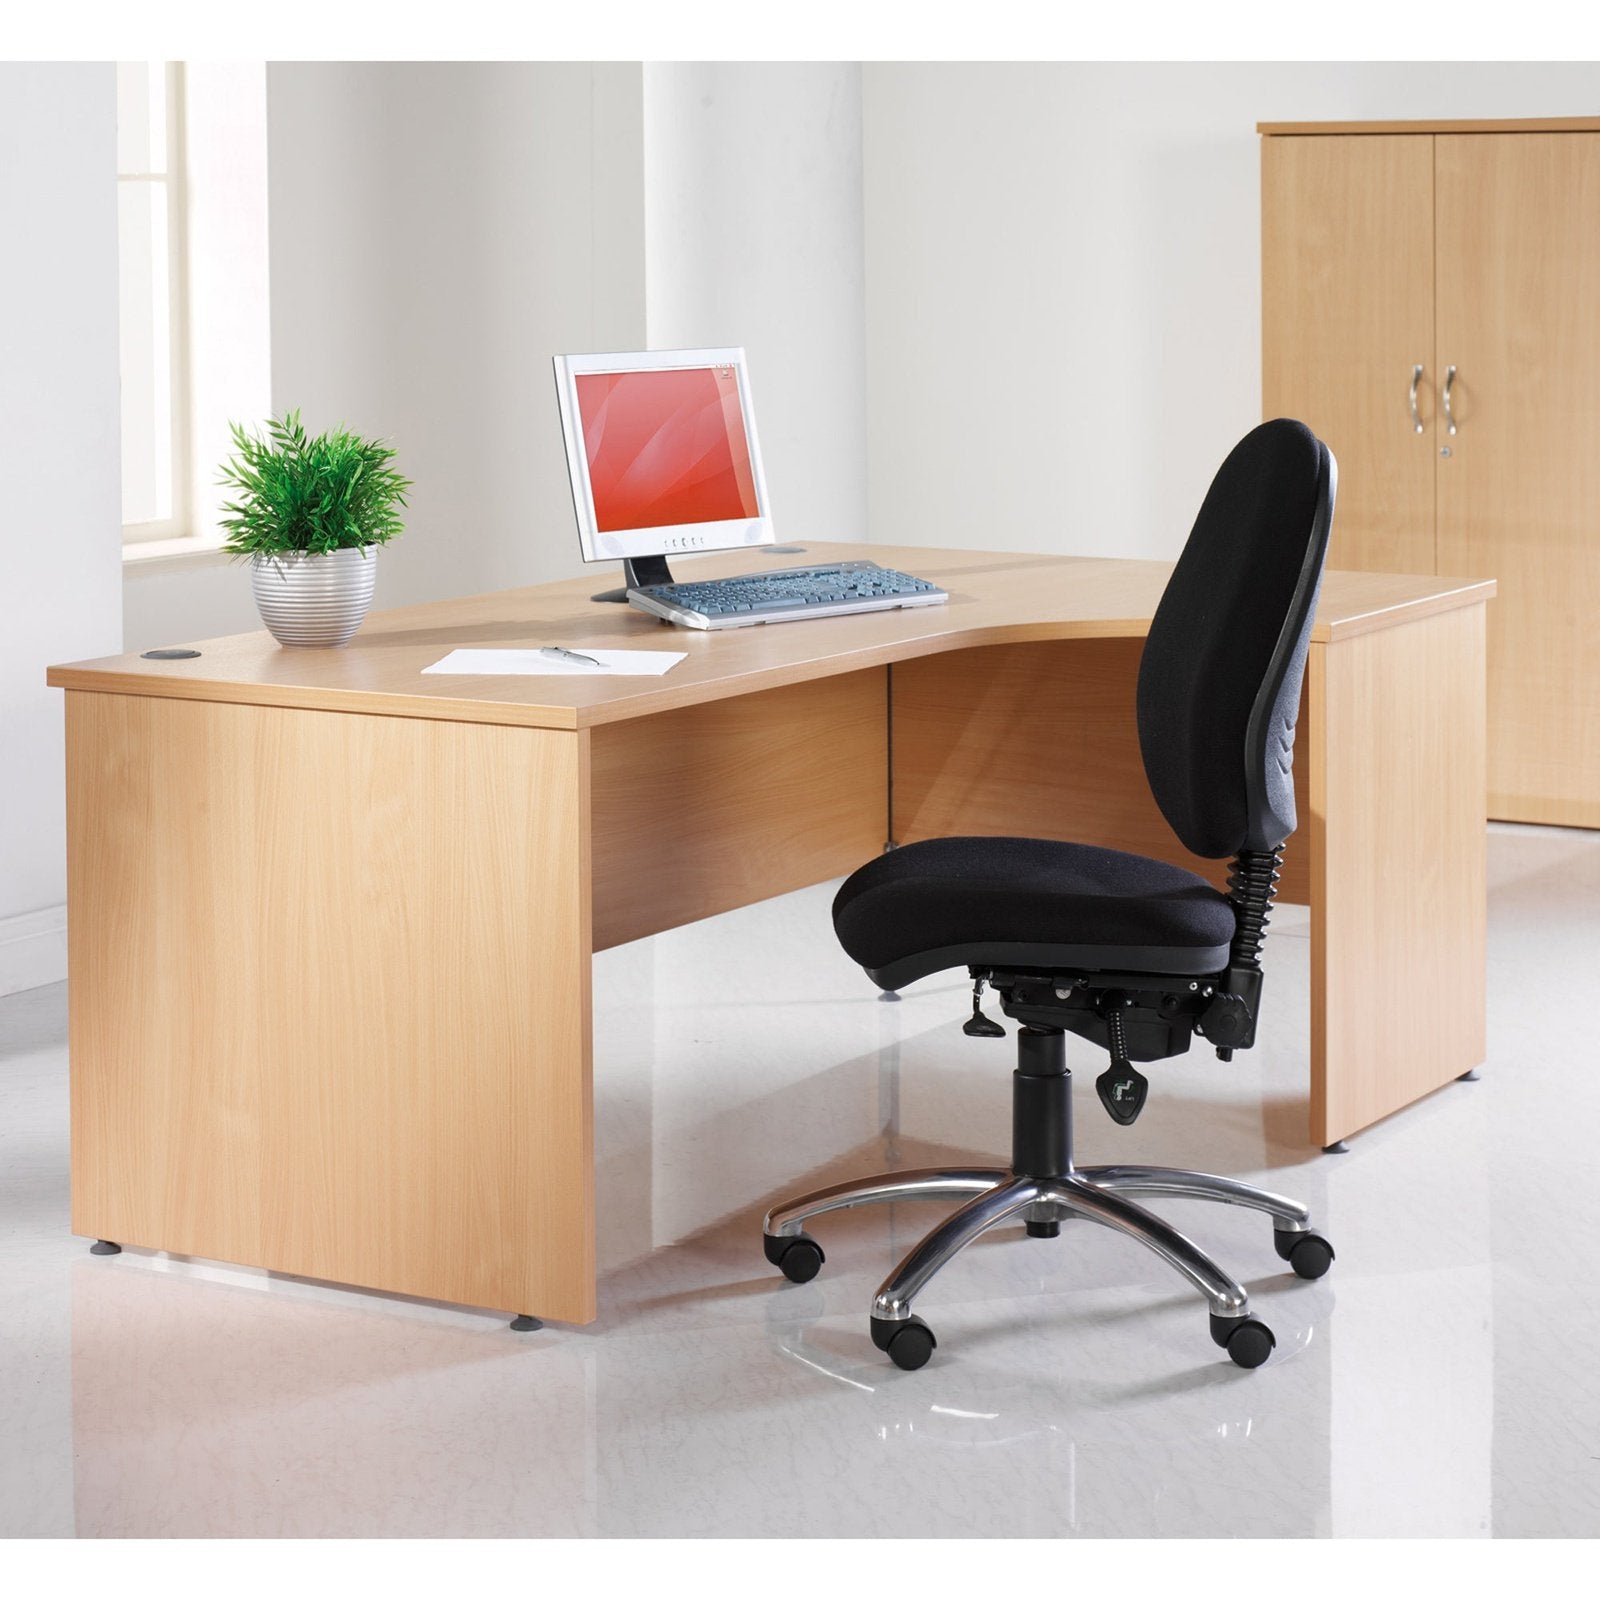 Maestro 25 panel leg straight desk 800 deep with 2 and 3 drawer pedestals - Office Products Online